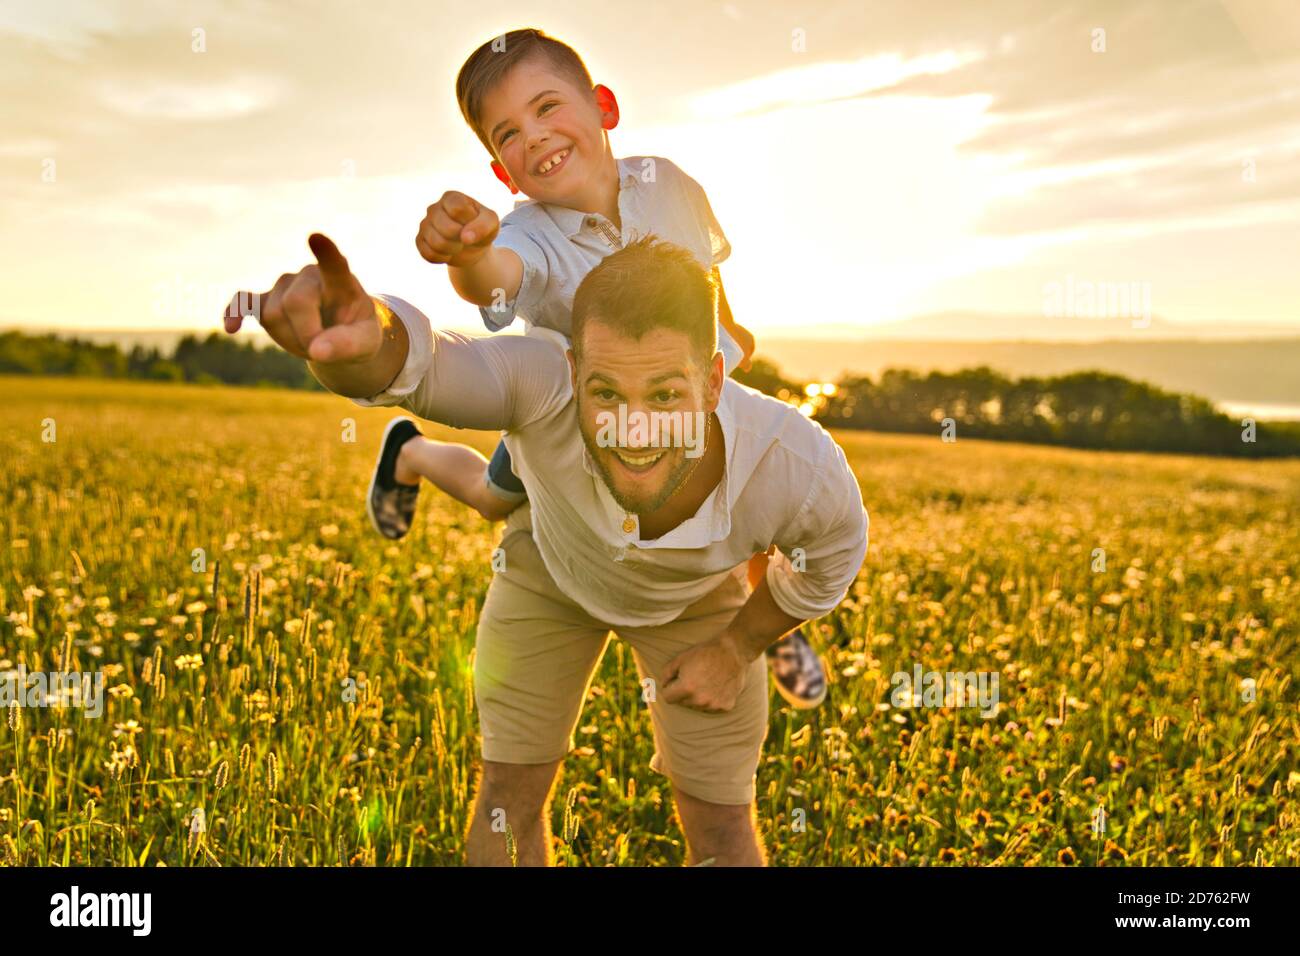 happy family of father and child on field at the sunset having fun on the father back Stock Photo